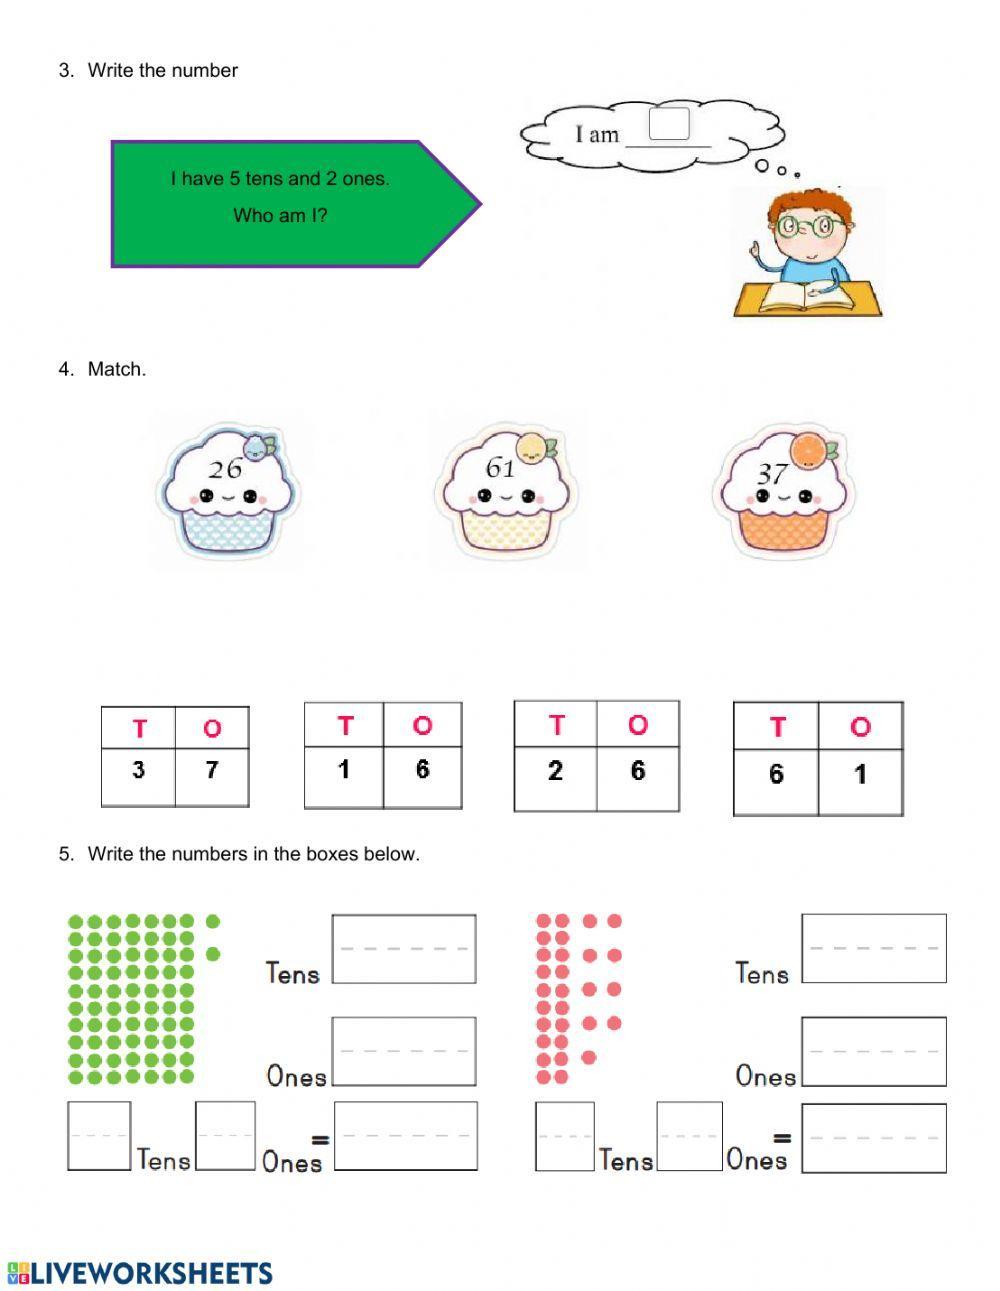 Tens and ones - Place value